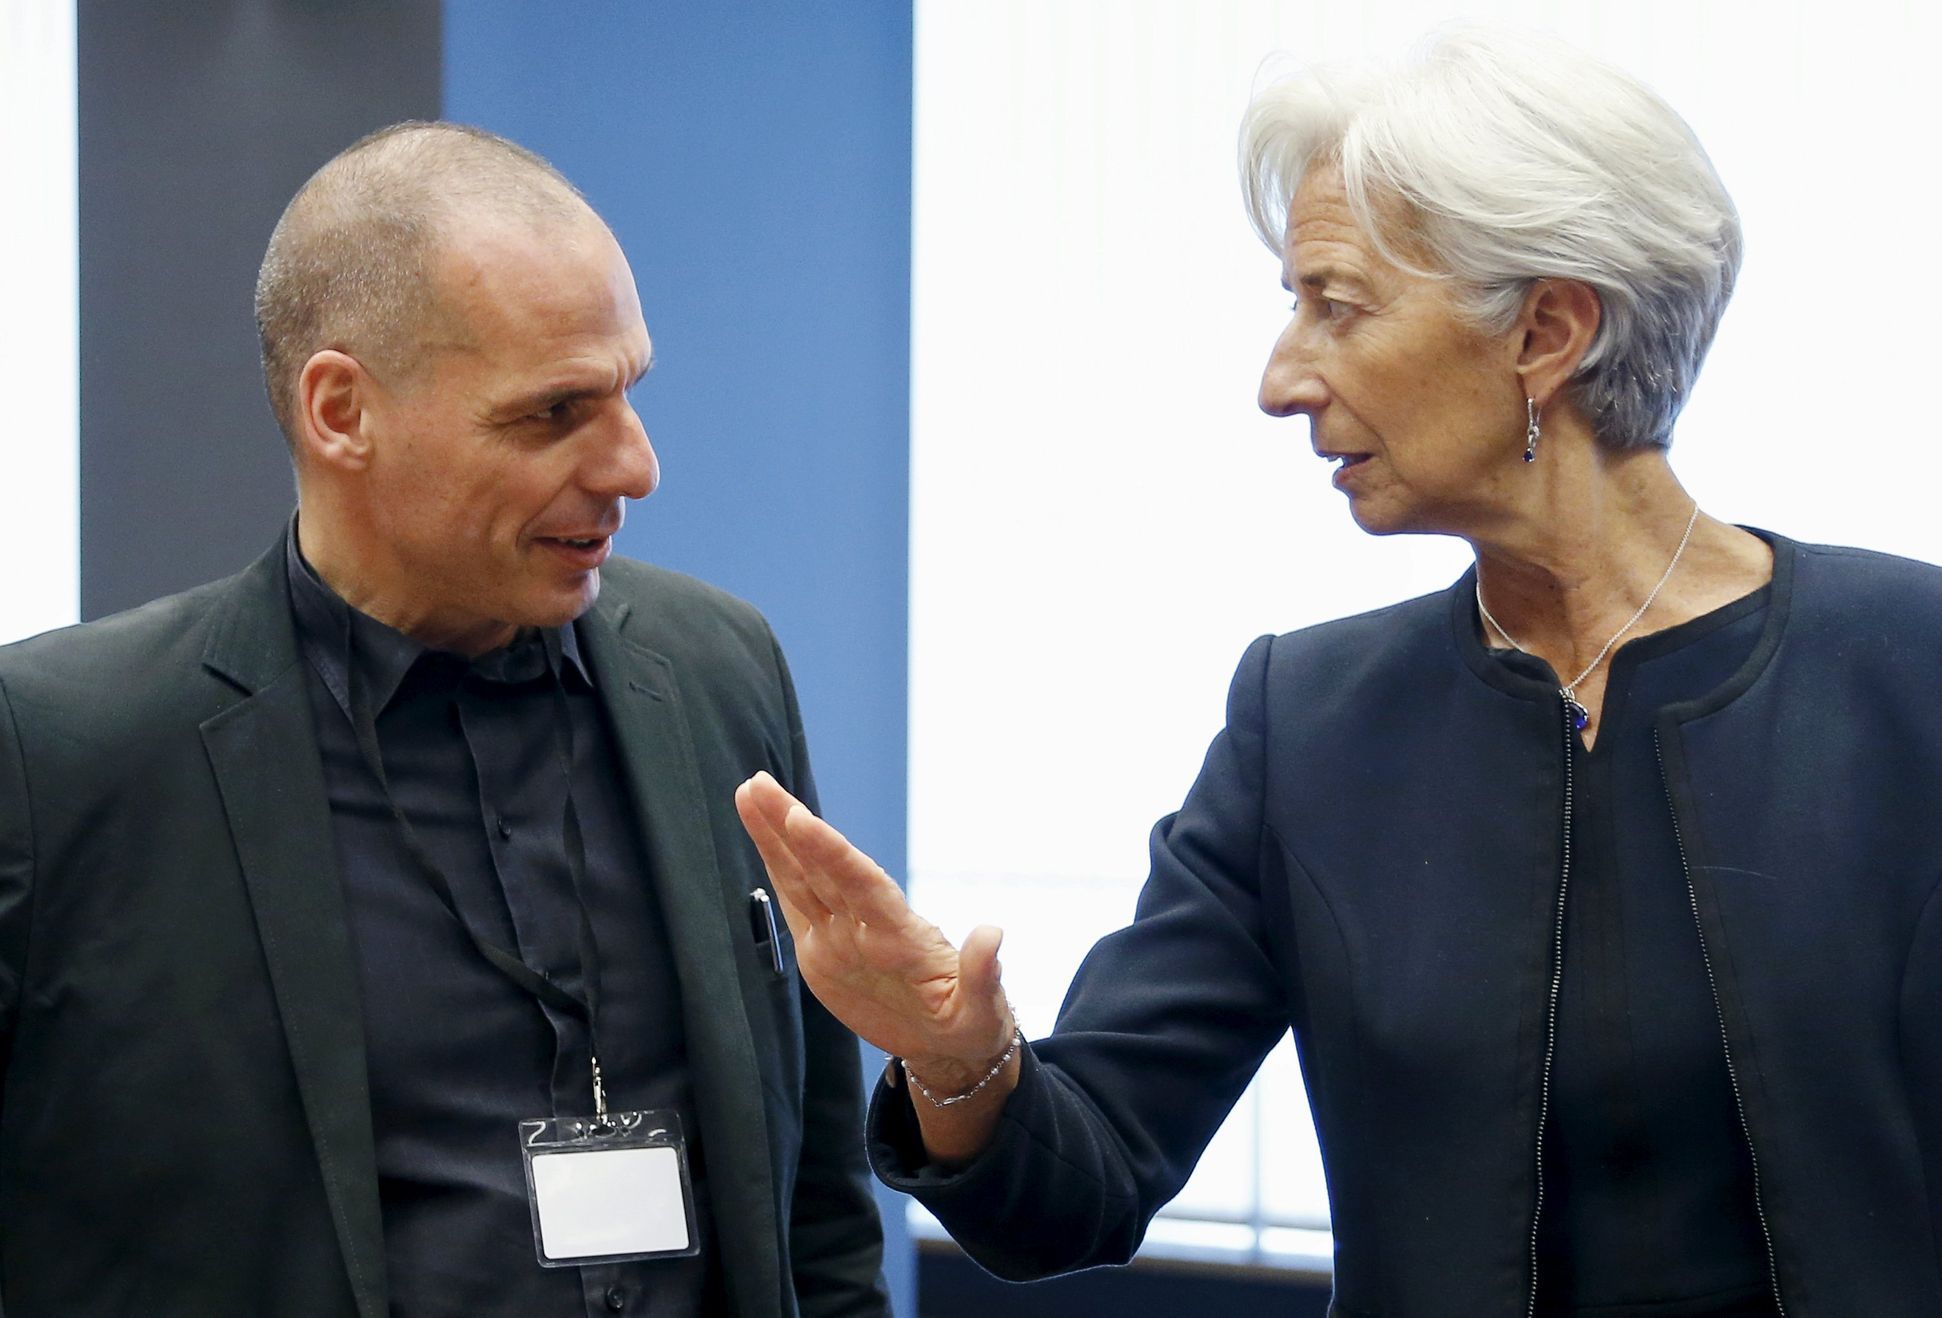 Greek Finance Minister Varoufakis listens to IMF Managing Director Lagarde during an euro zone finance ministers meeting in Luxembourg